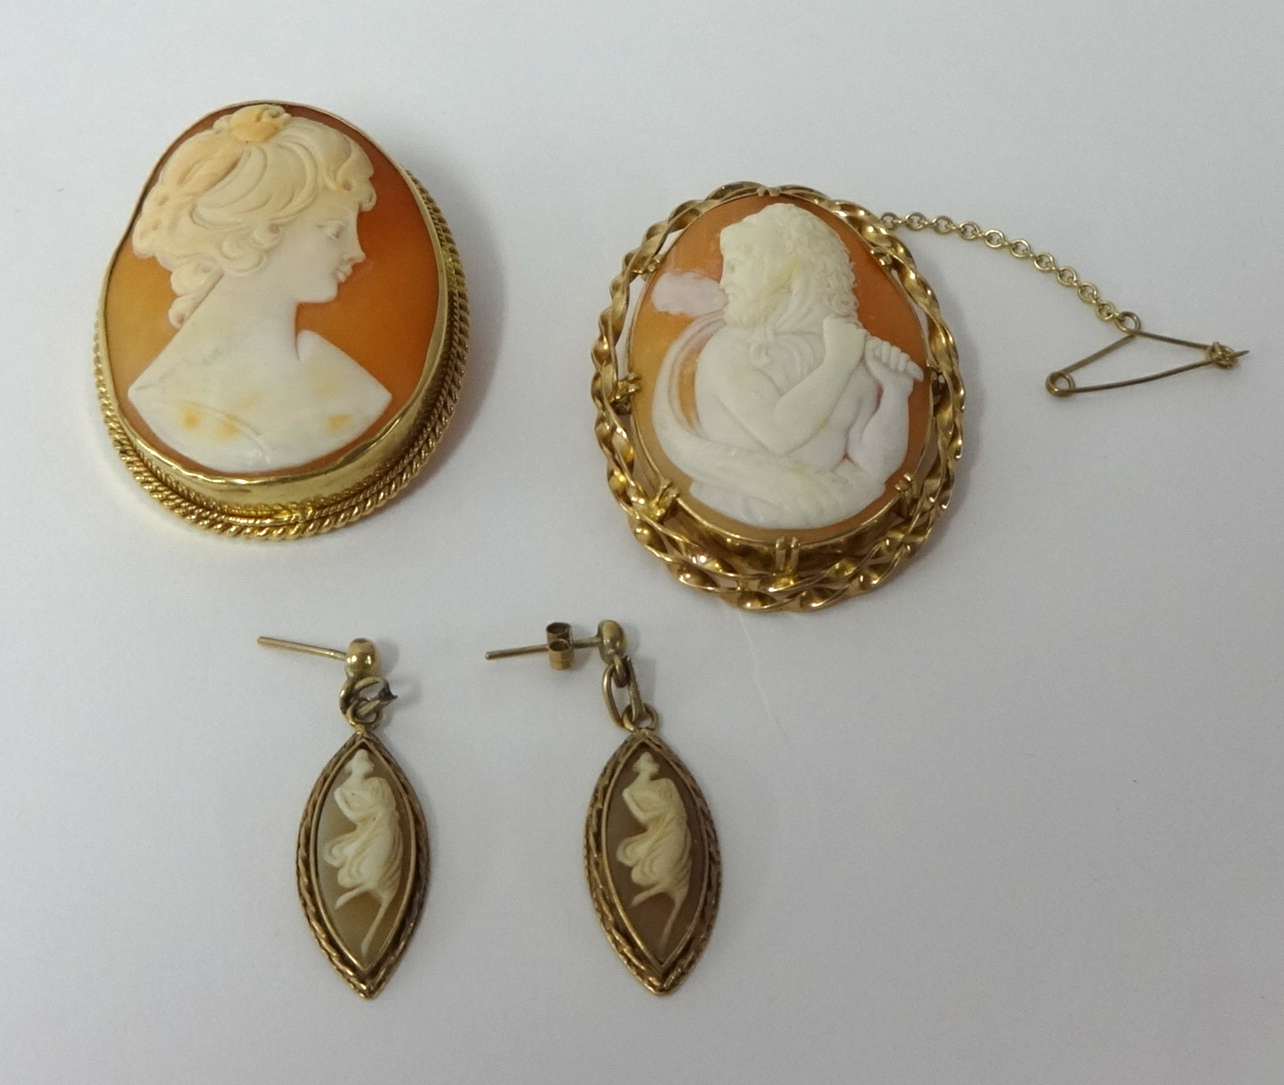 A 9ct gold framed portrait cameo t/w another cameo and a pair of silver 9ct gold mounted pendant